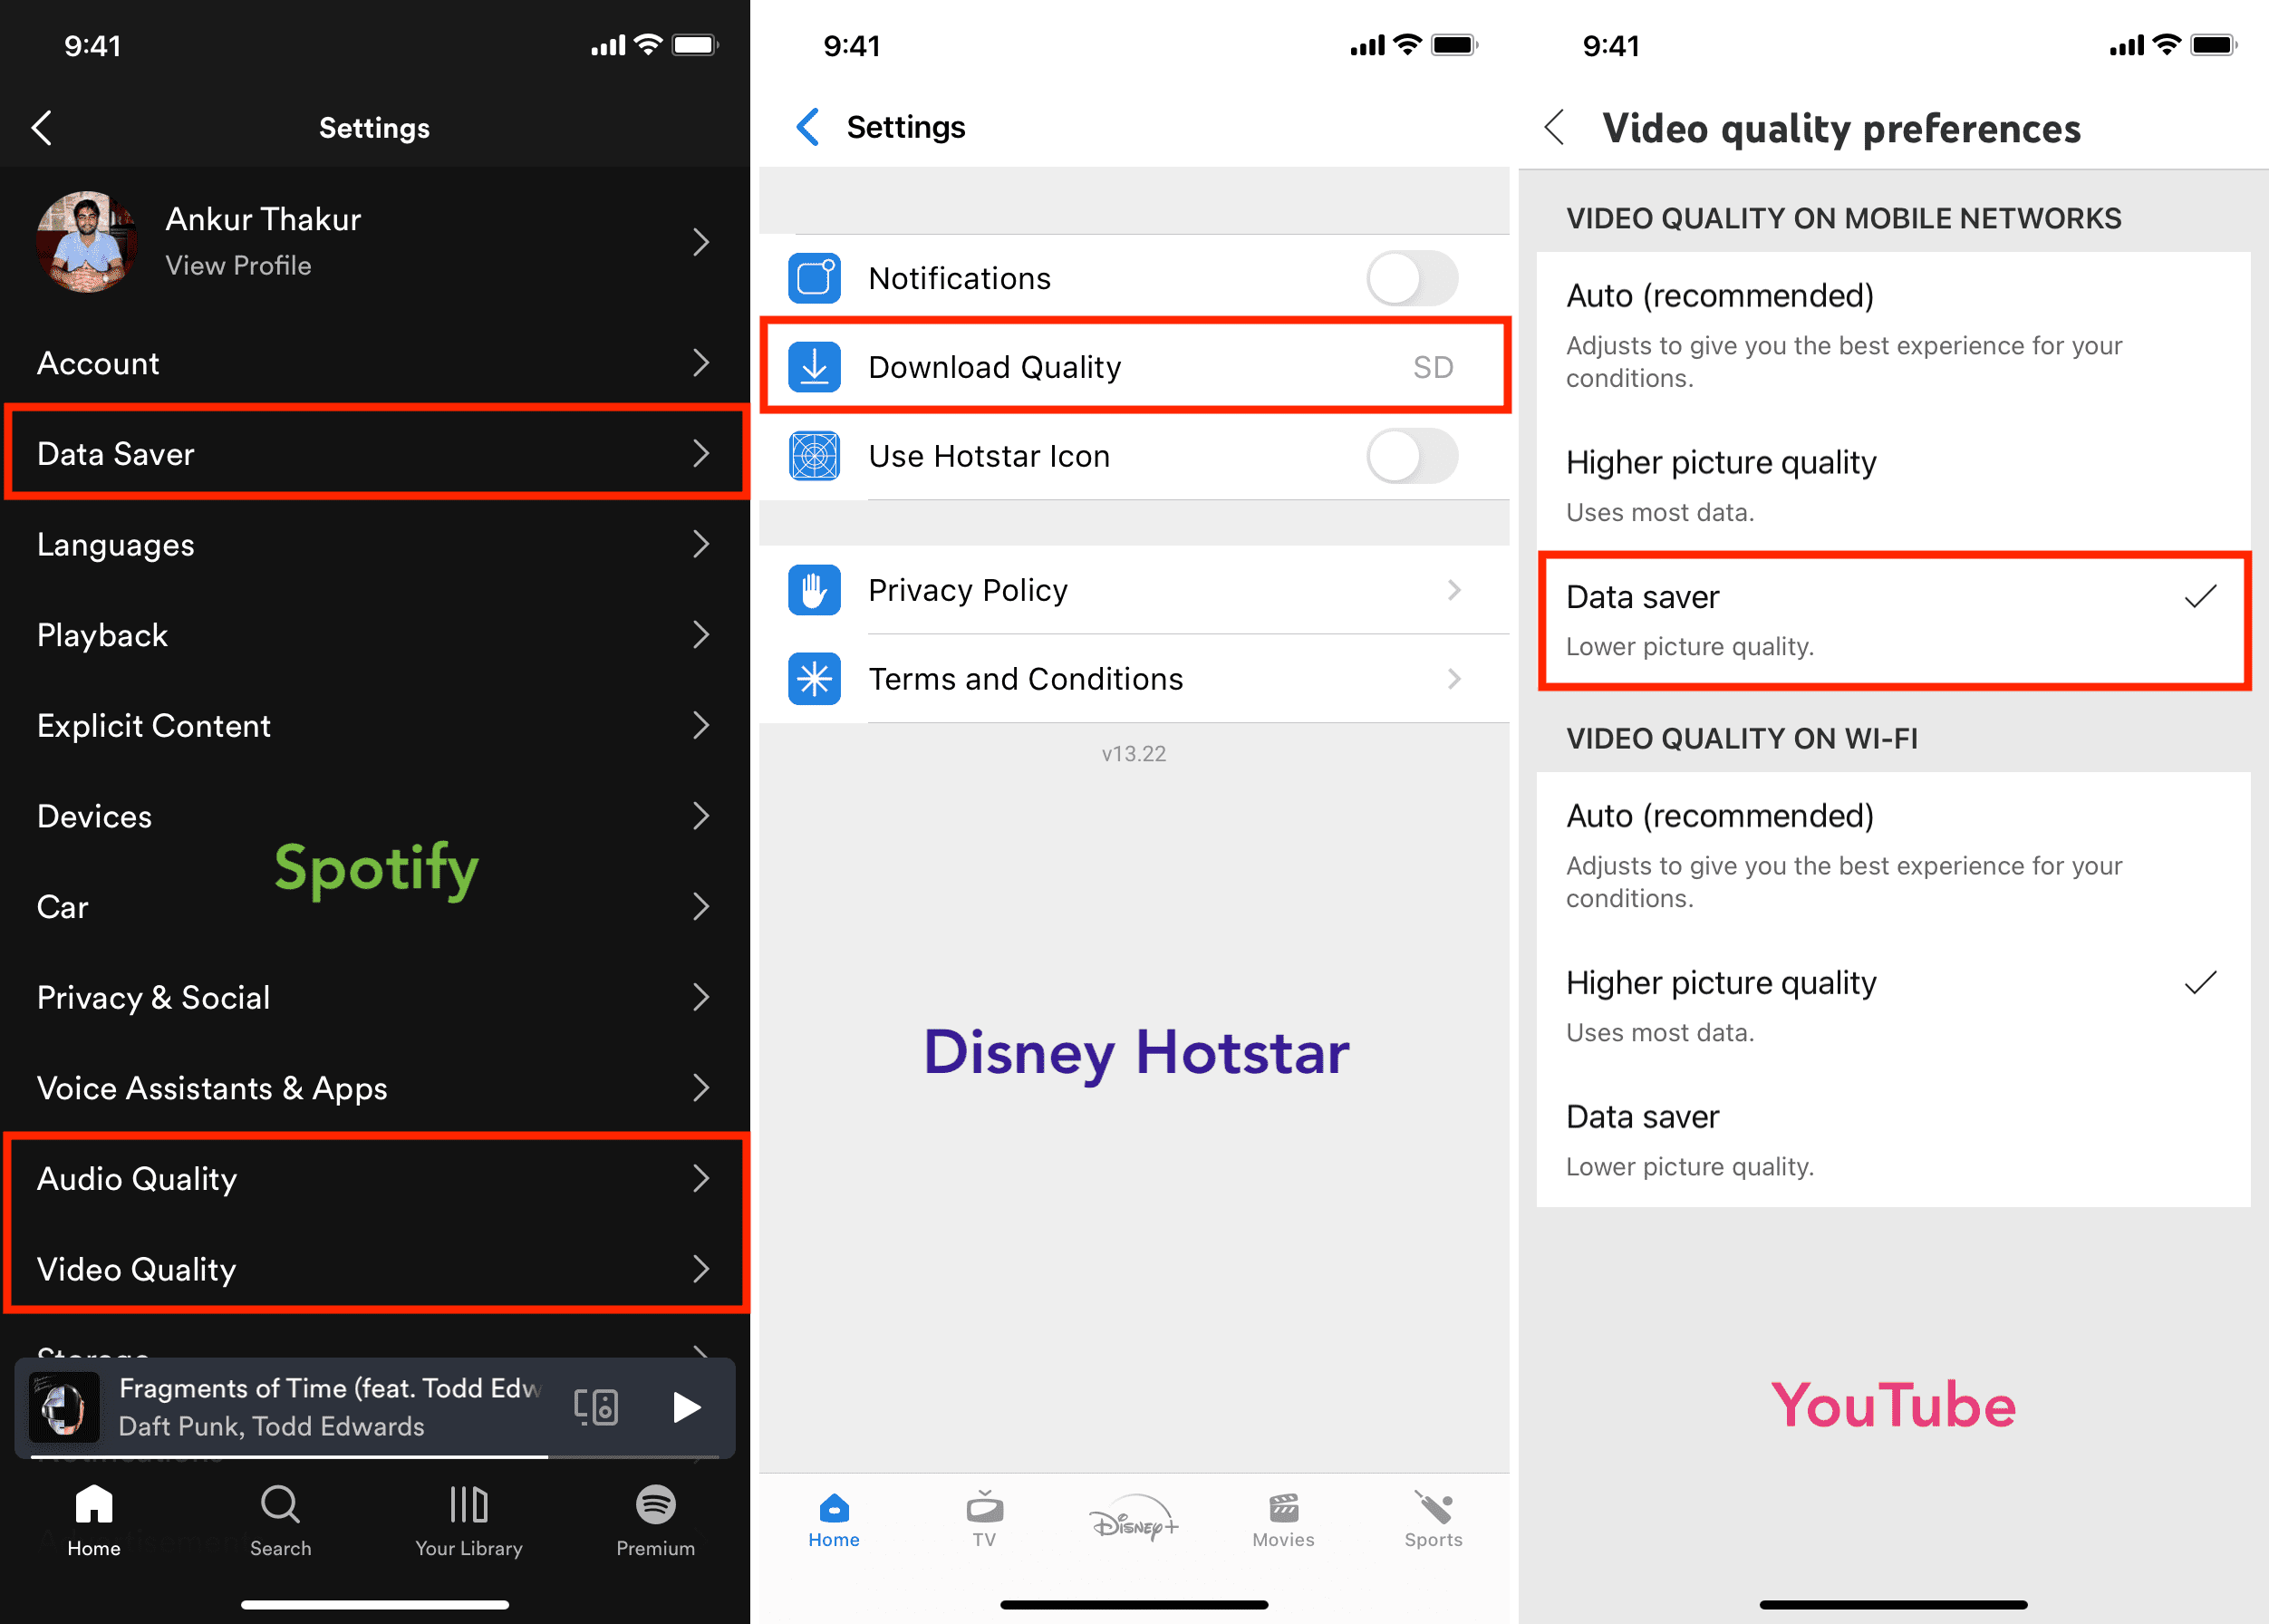 Cellular data options in streaming apps to save data